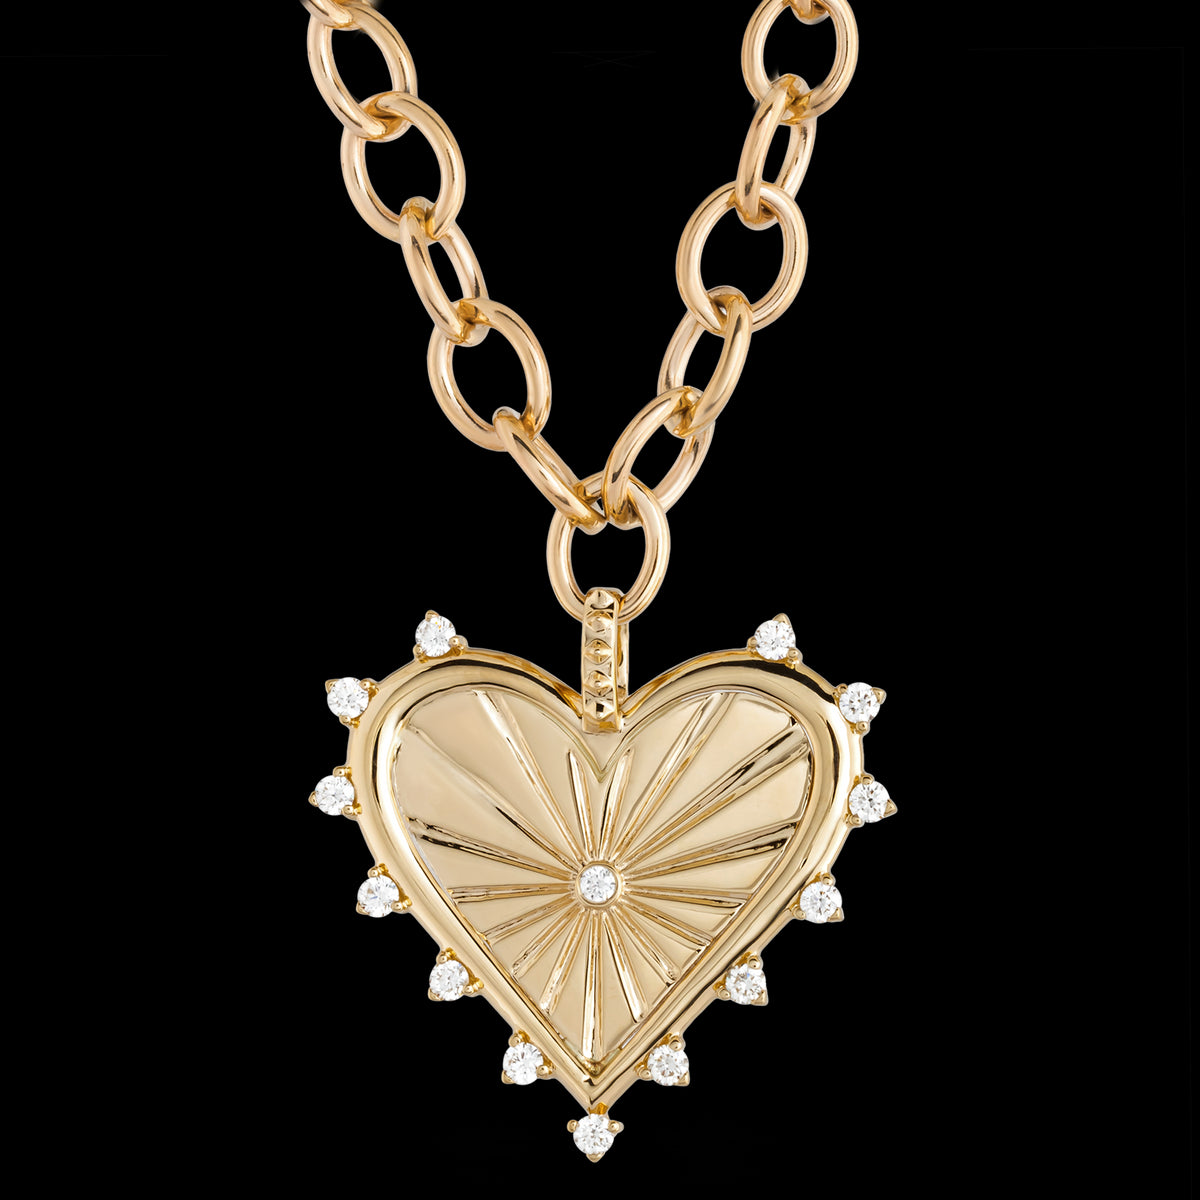 Spiked Heart Necklace with Chain